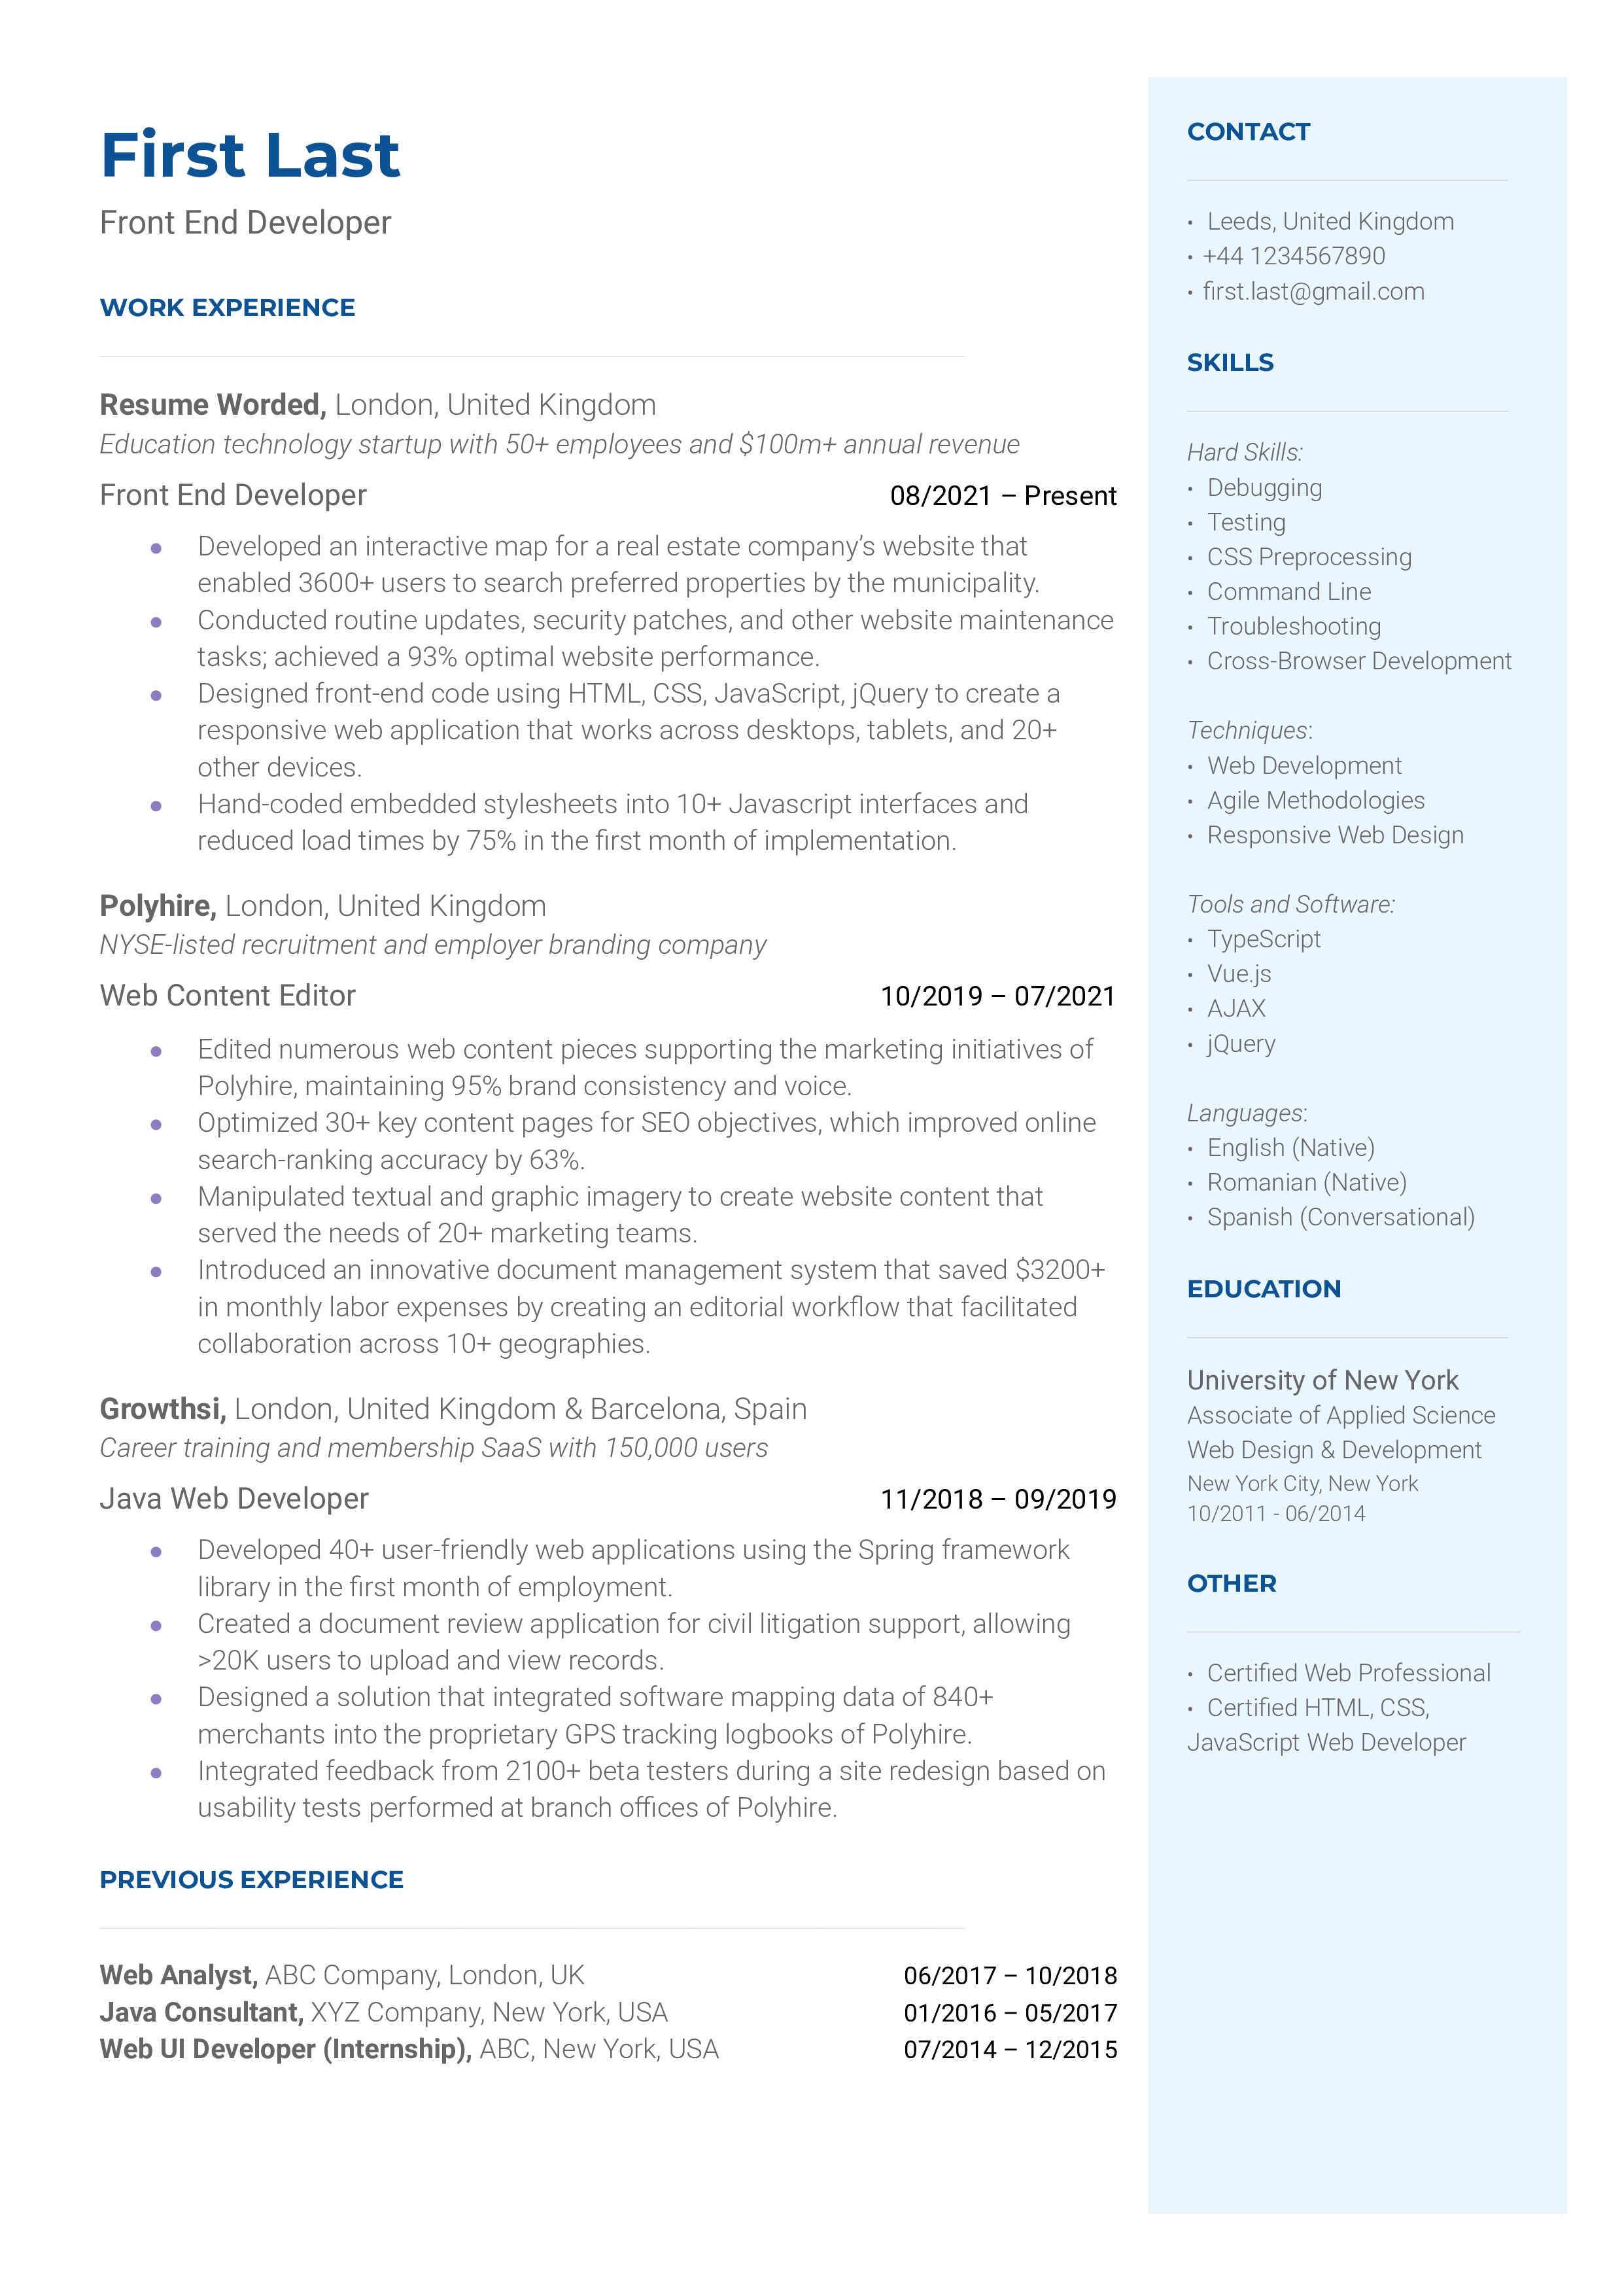 A front end developer resume template focused on technical skills.